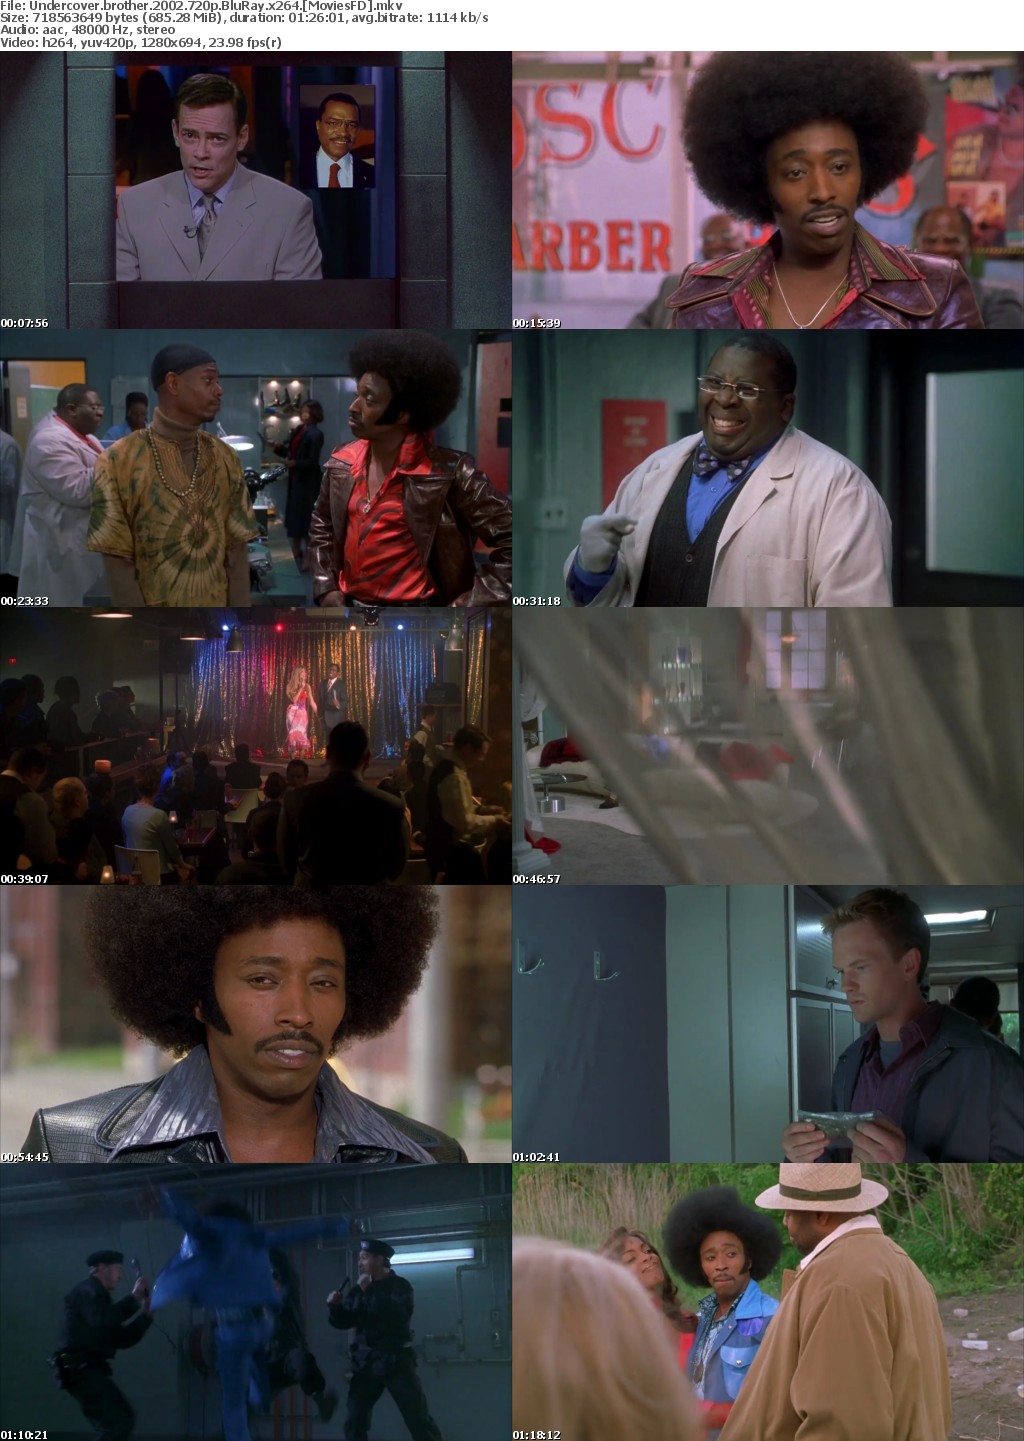 Undercover Brother (2002) 720P Bluray X264 Moviesfd